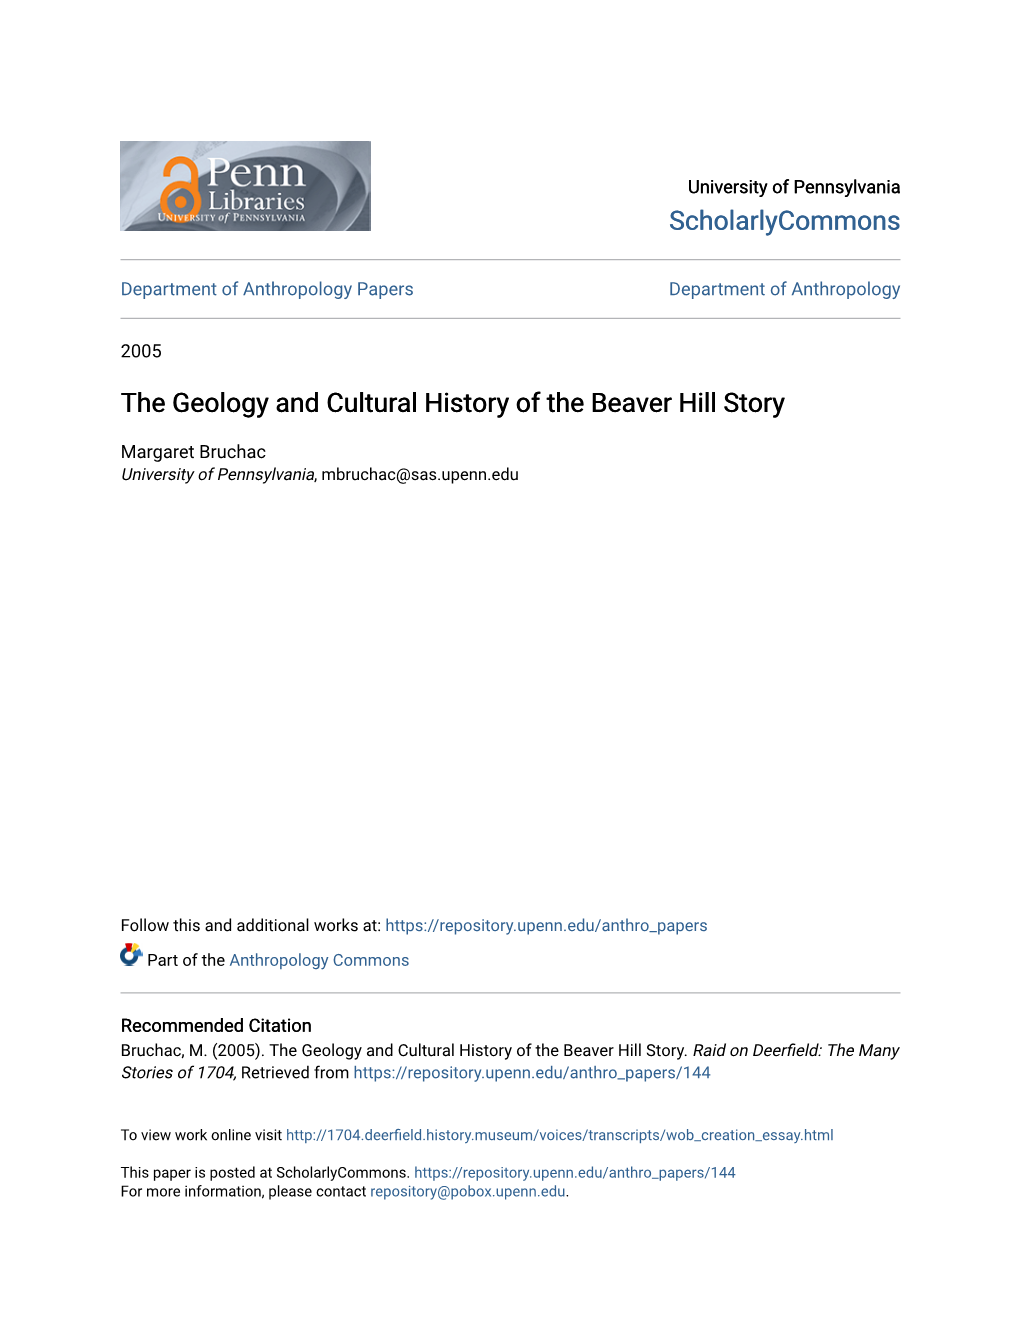 The Geology and Cultural History of the Beaver Hill Story